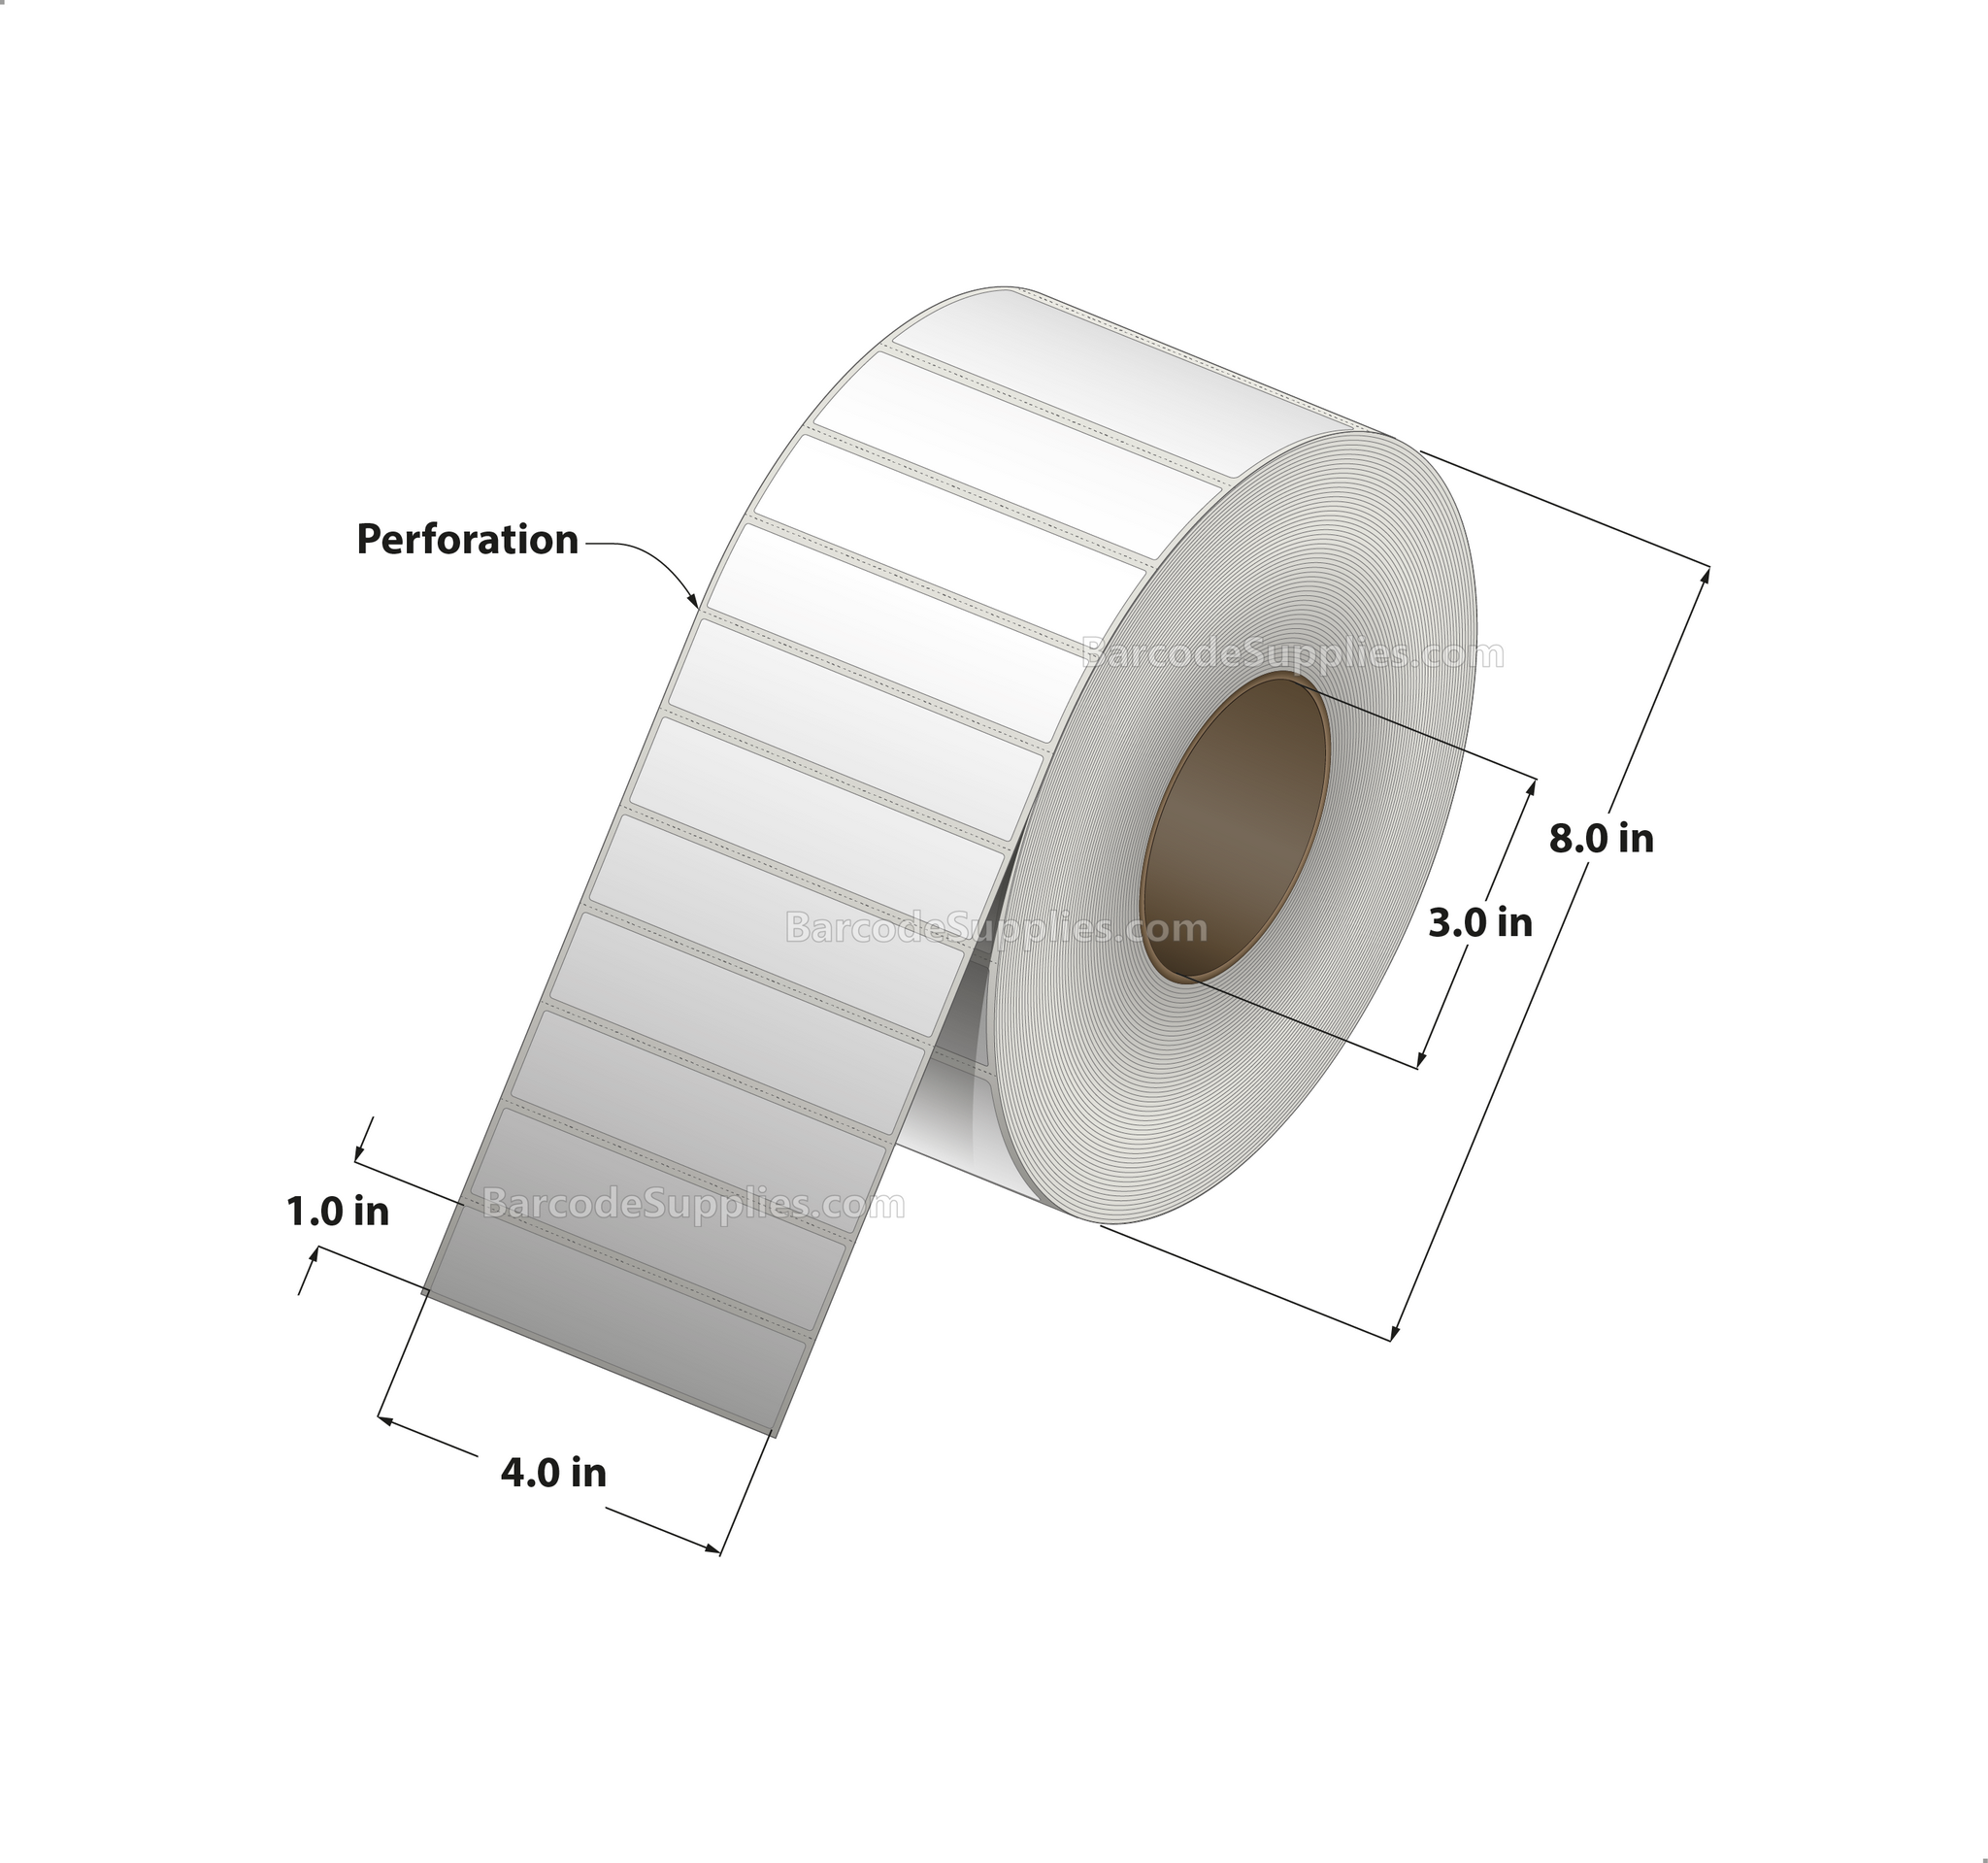 4 x 1 Thermal Transfer White Labels With Permanent Acrylic Adhesive - Perforated - 5500 Labels Per Roll - Carton Of 4 Rolls - 22000 Labels Total - MPN: TH41-1P